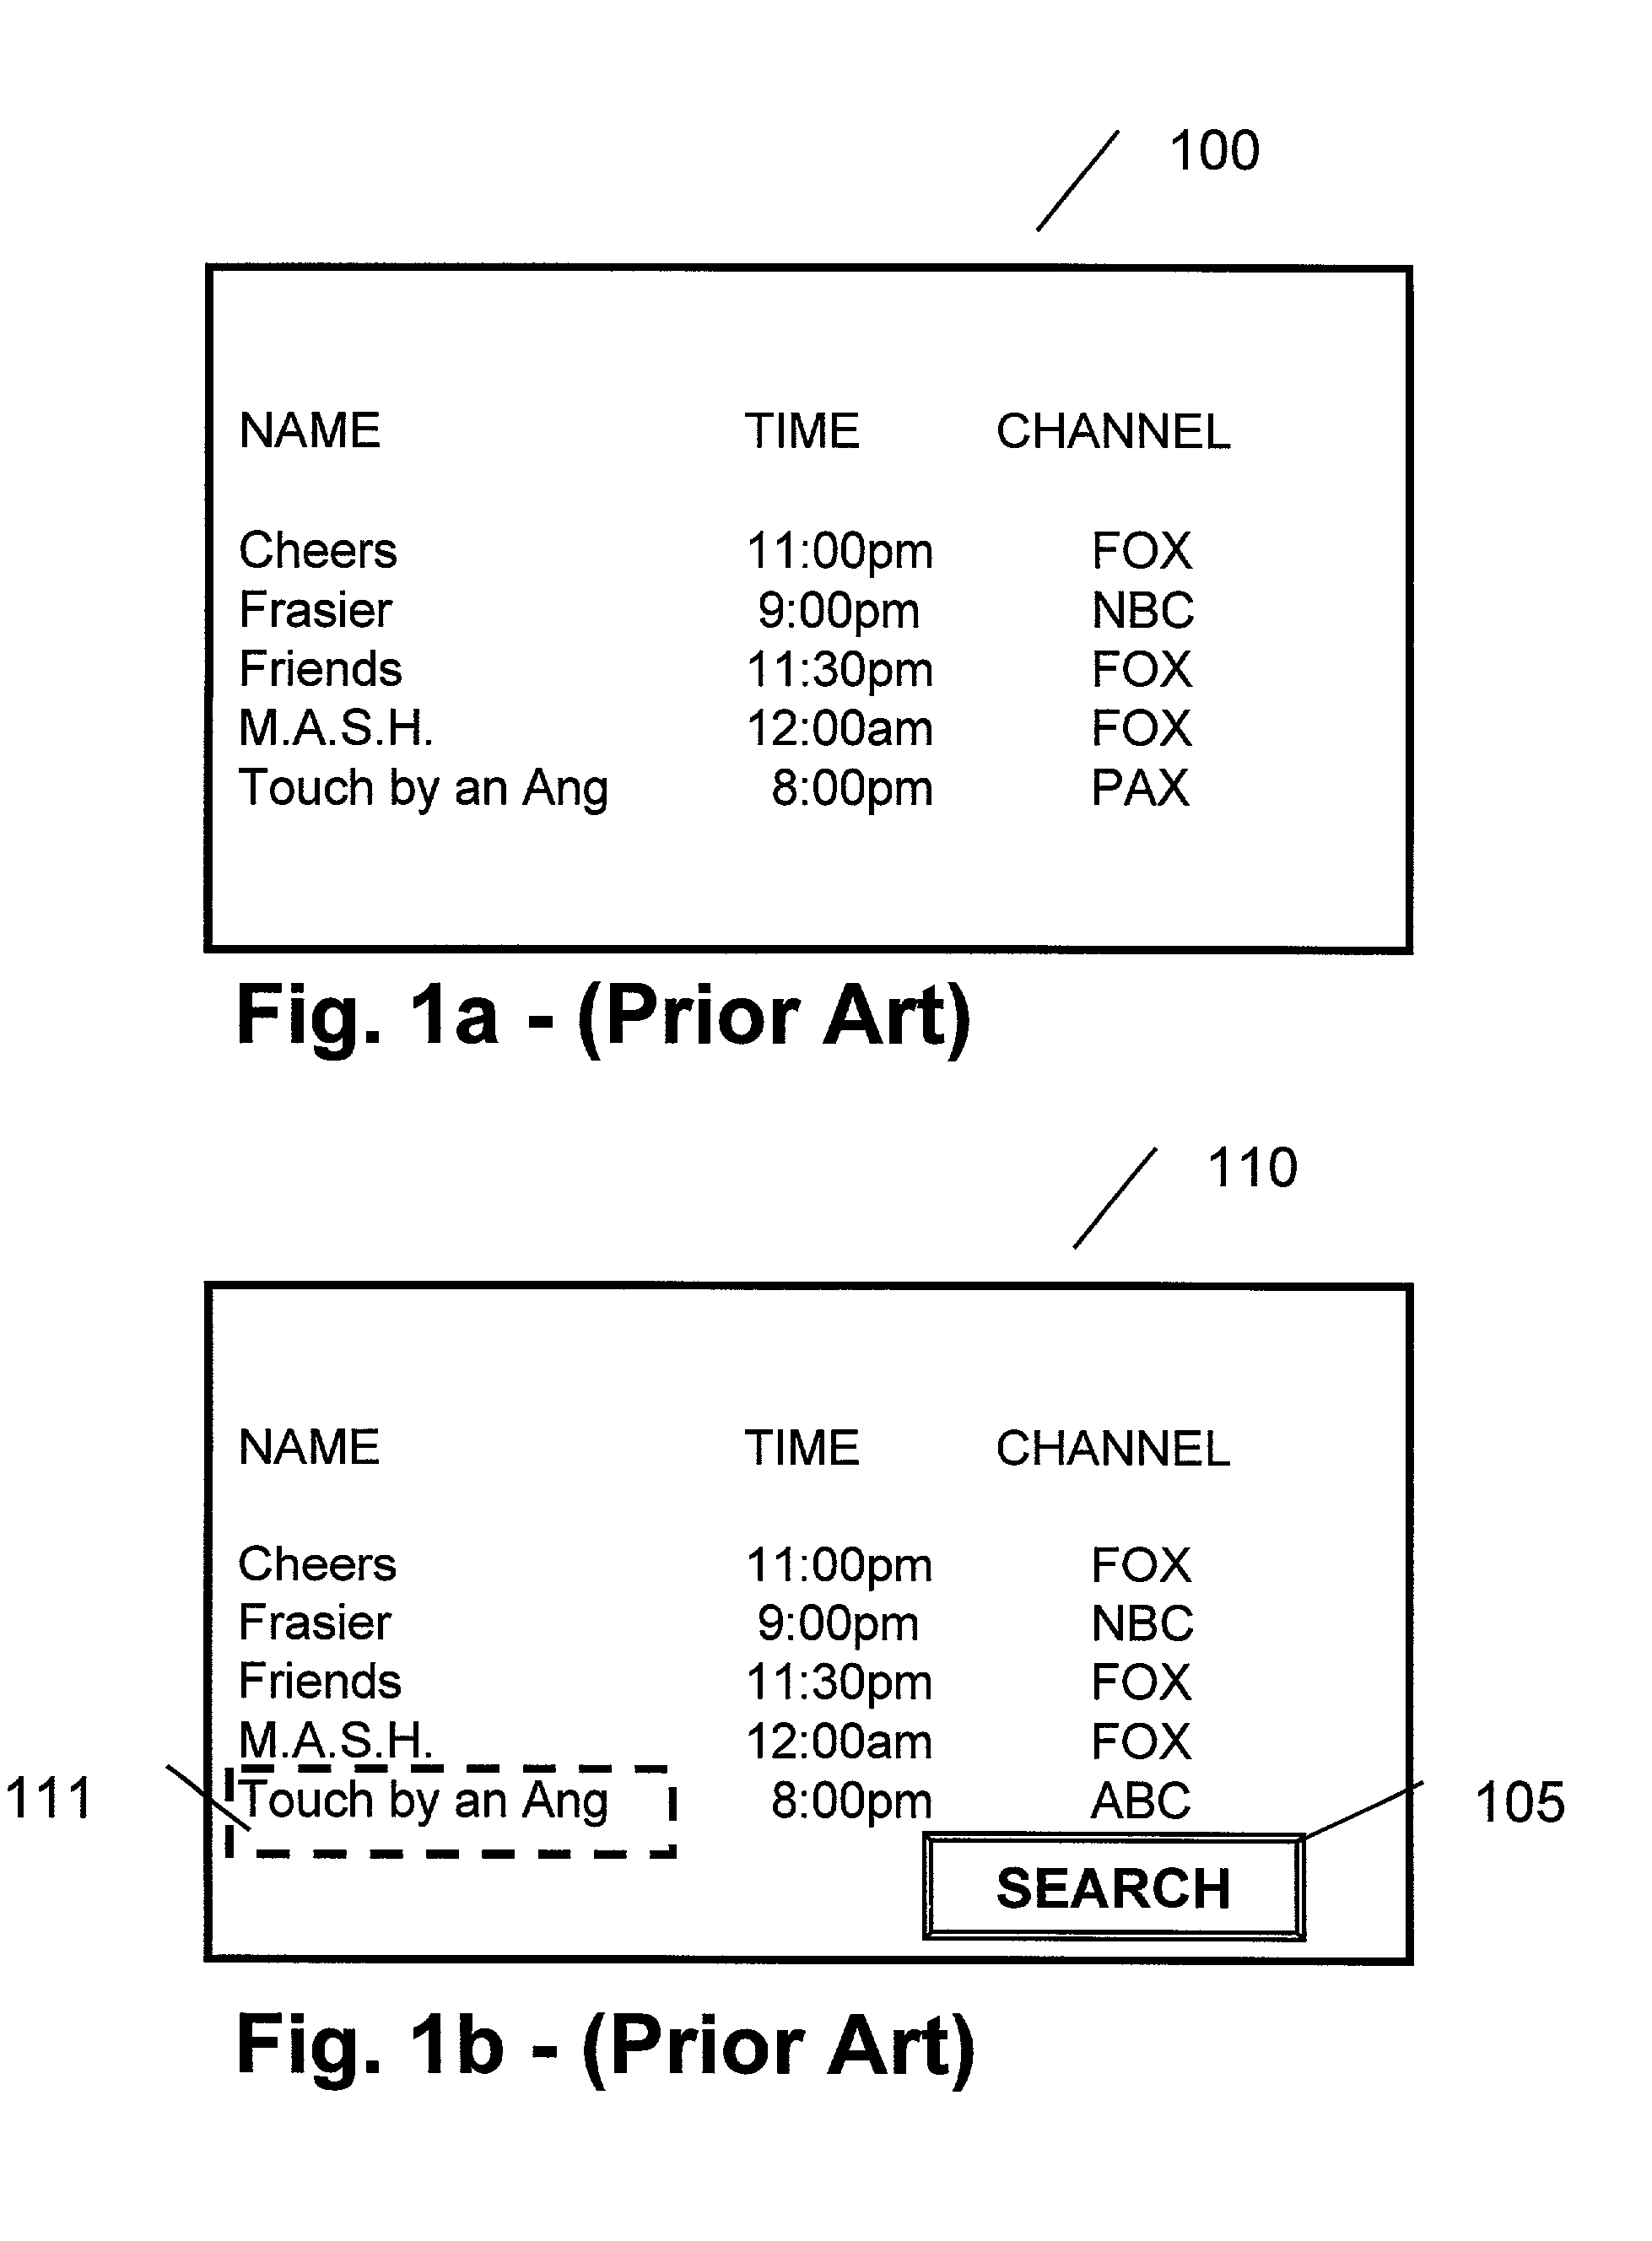 Method and apparatus for finding the same of similar shows